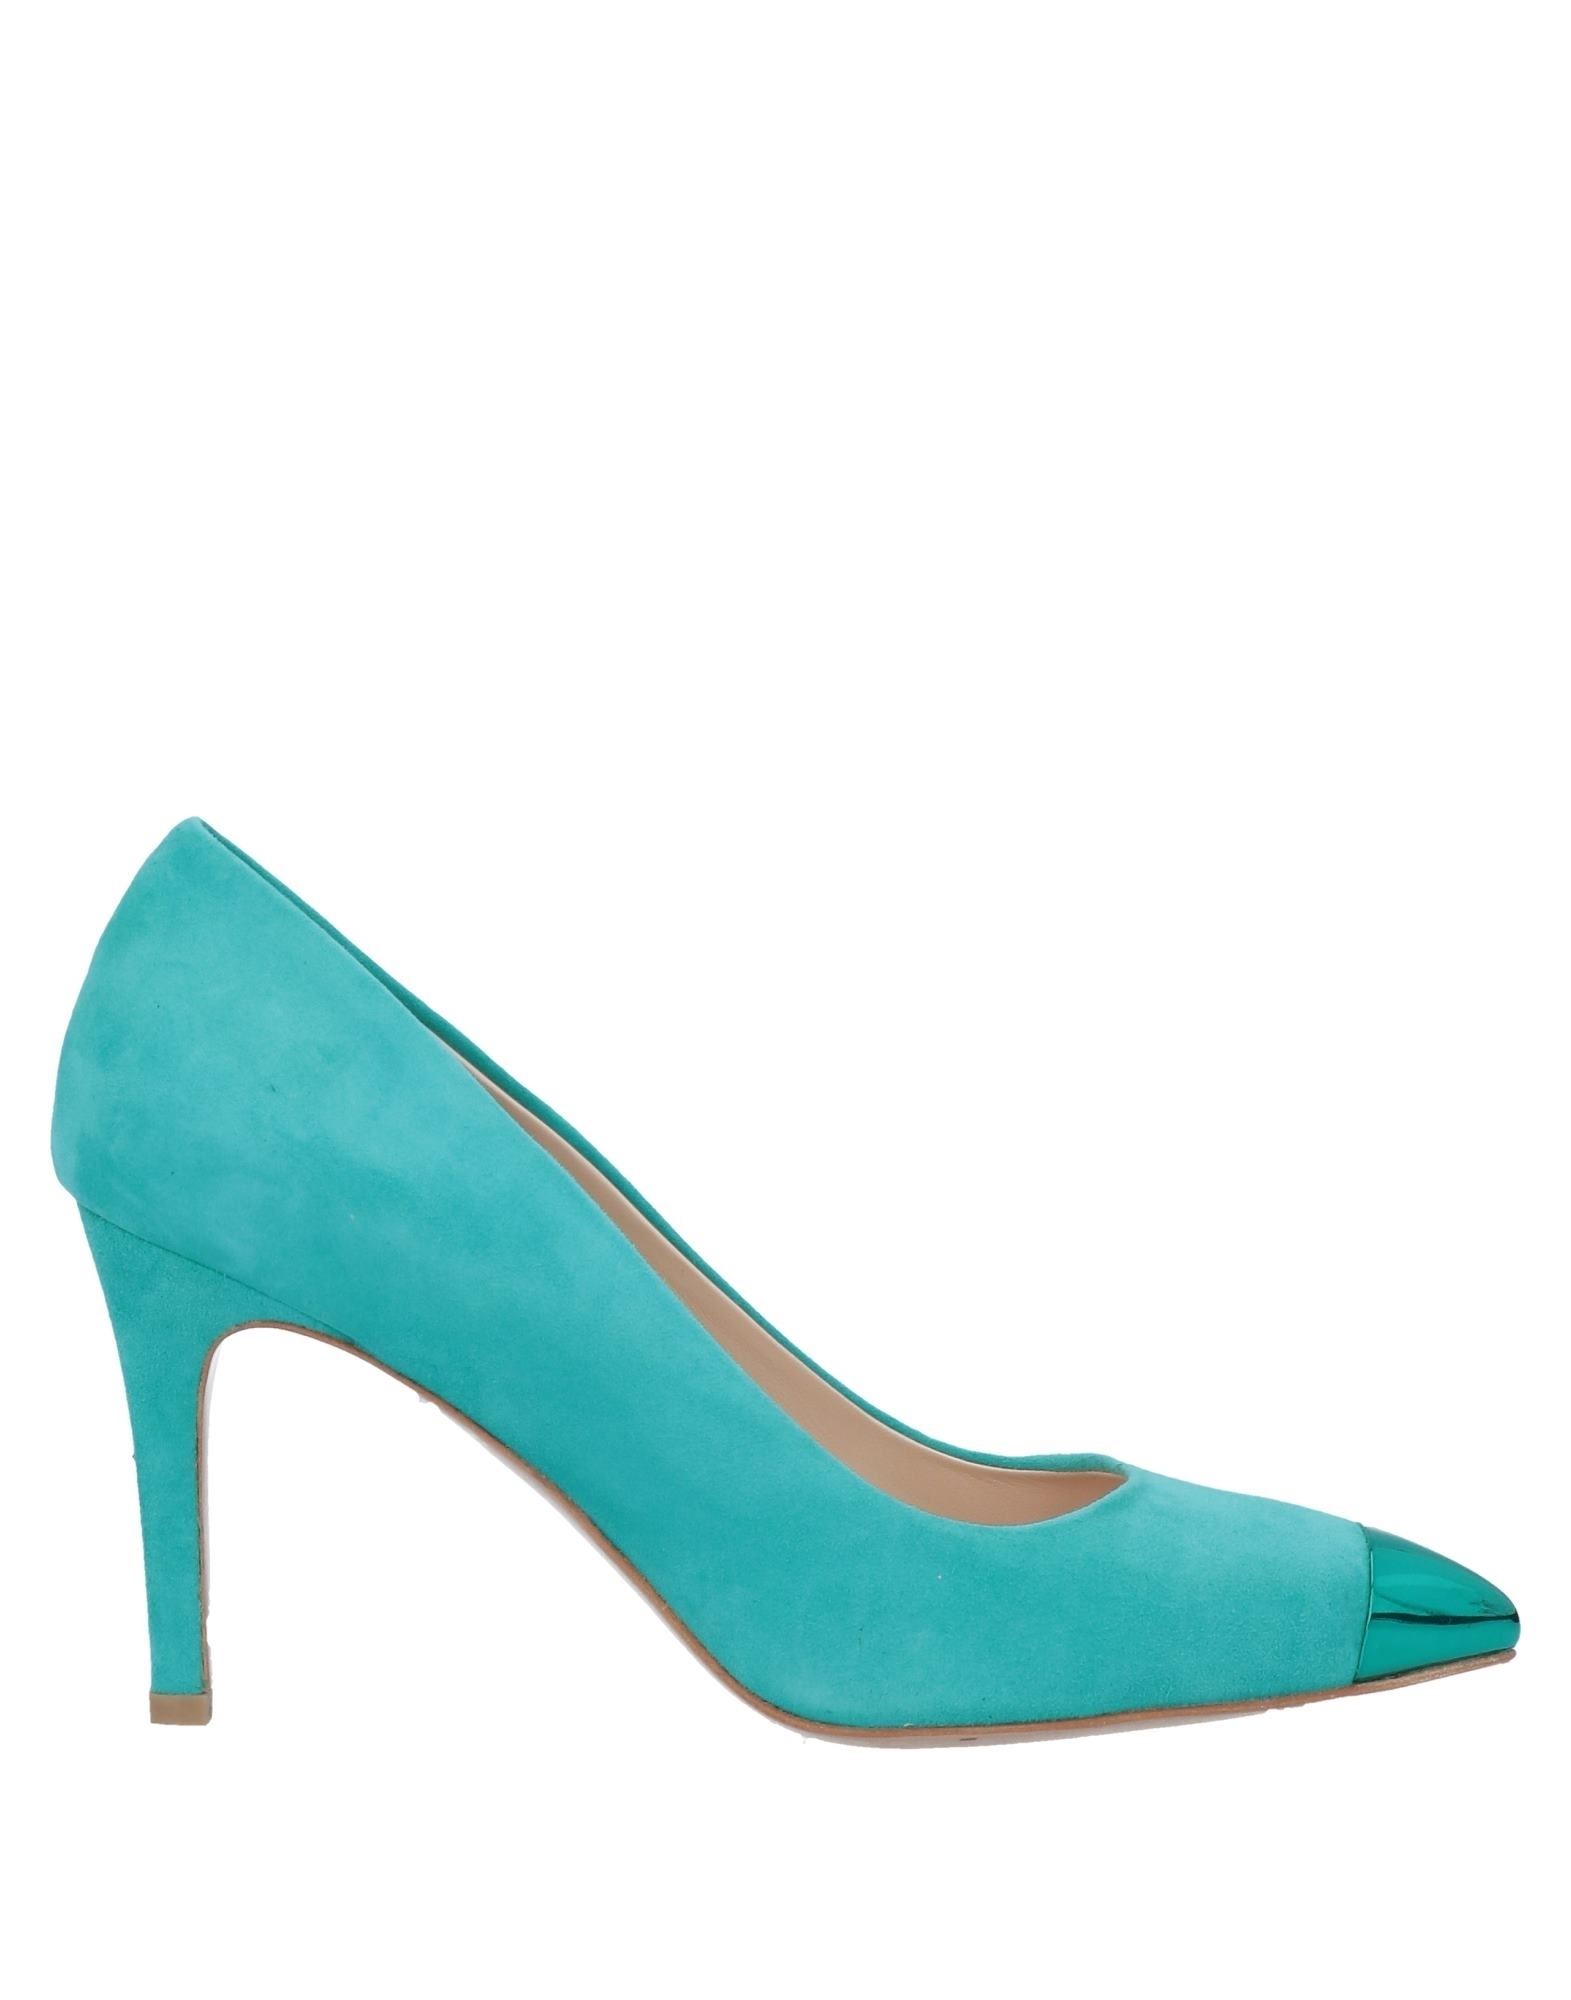 Islo Isabella Lorusso Pumps In Turquoise